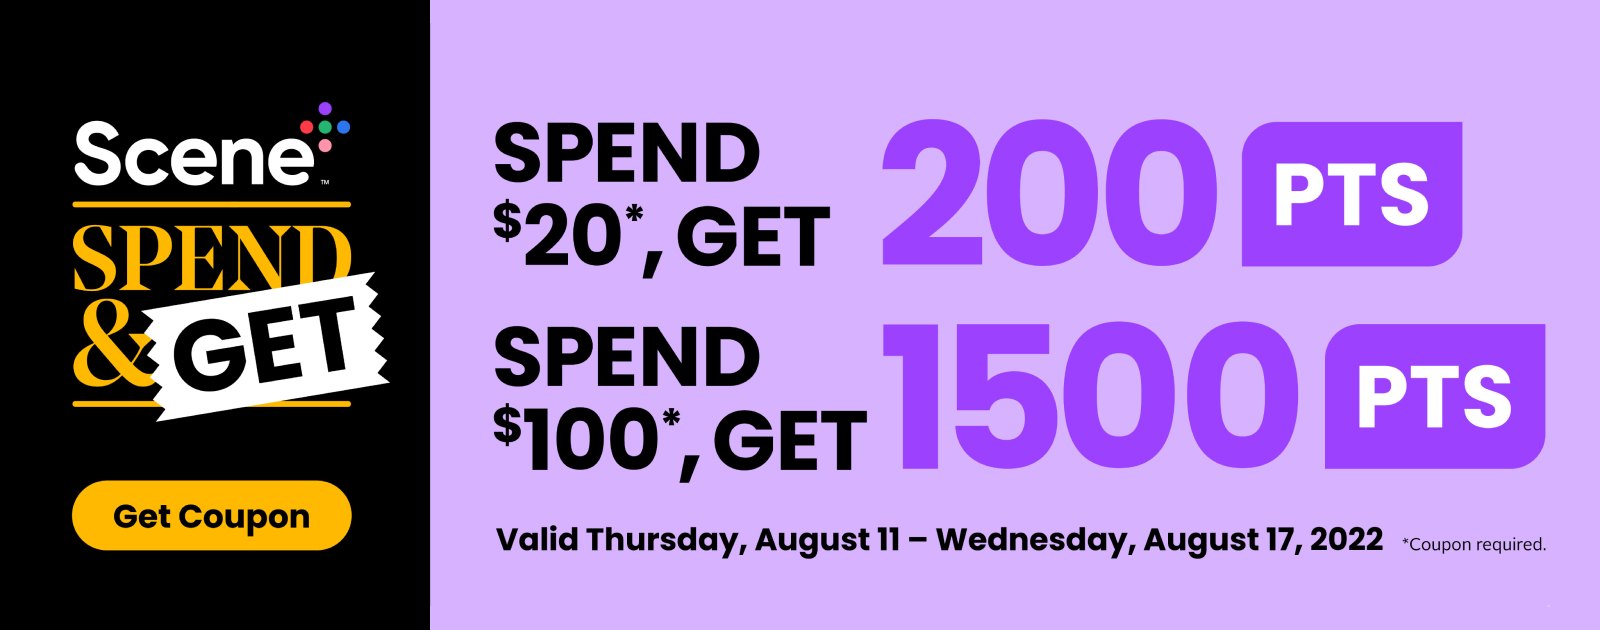 Text Reading 'Scene Spend & Get Offers. Spend $20 and get 200 points. Spend $100 and get 1500 points. Offer valid till Thursday, August 11 to Wednesday, August 17, 2022. 'Get coupon' from the button given on the left side of the banner.'